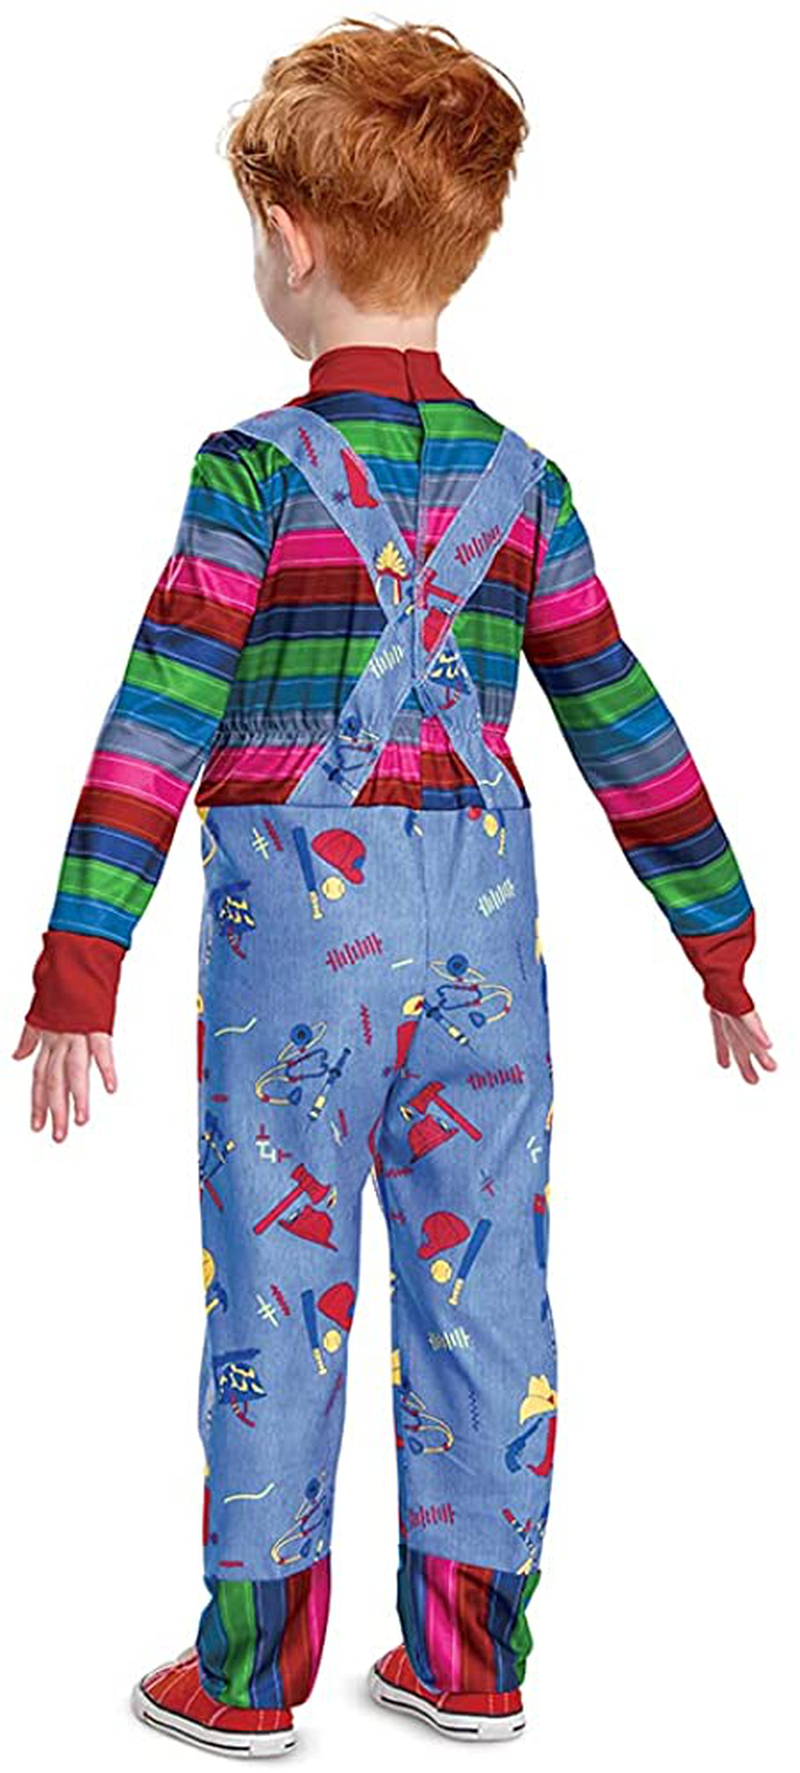 Chucky Costume for Kids, Official Childs Play Chucky Costume Jumpsuit Outfit, Classic Toddler Size Apparel & Accessories > Costumes & Accessories > Costumes Disguise   